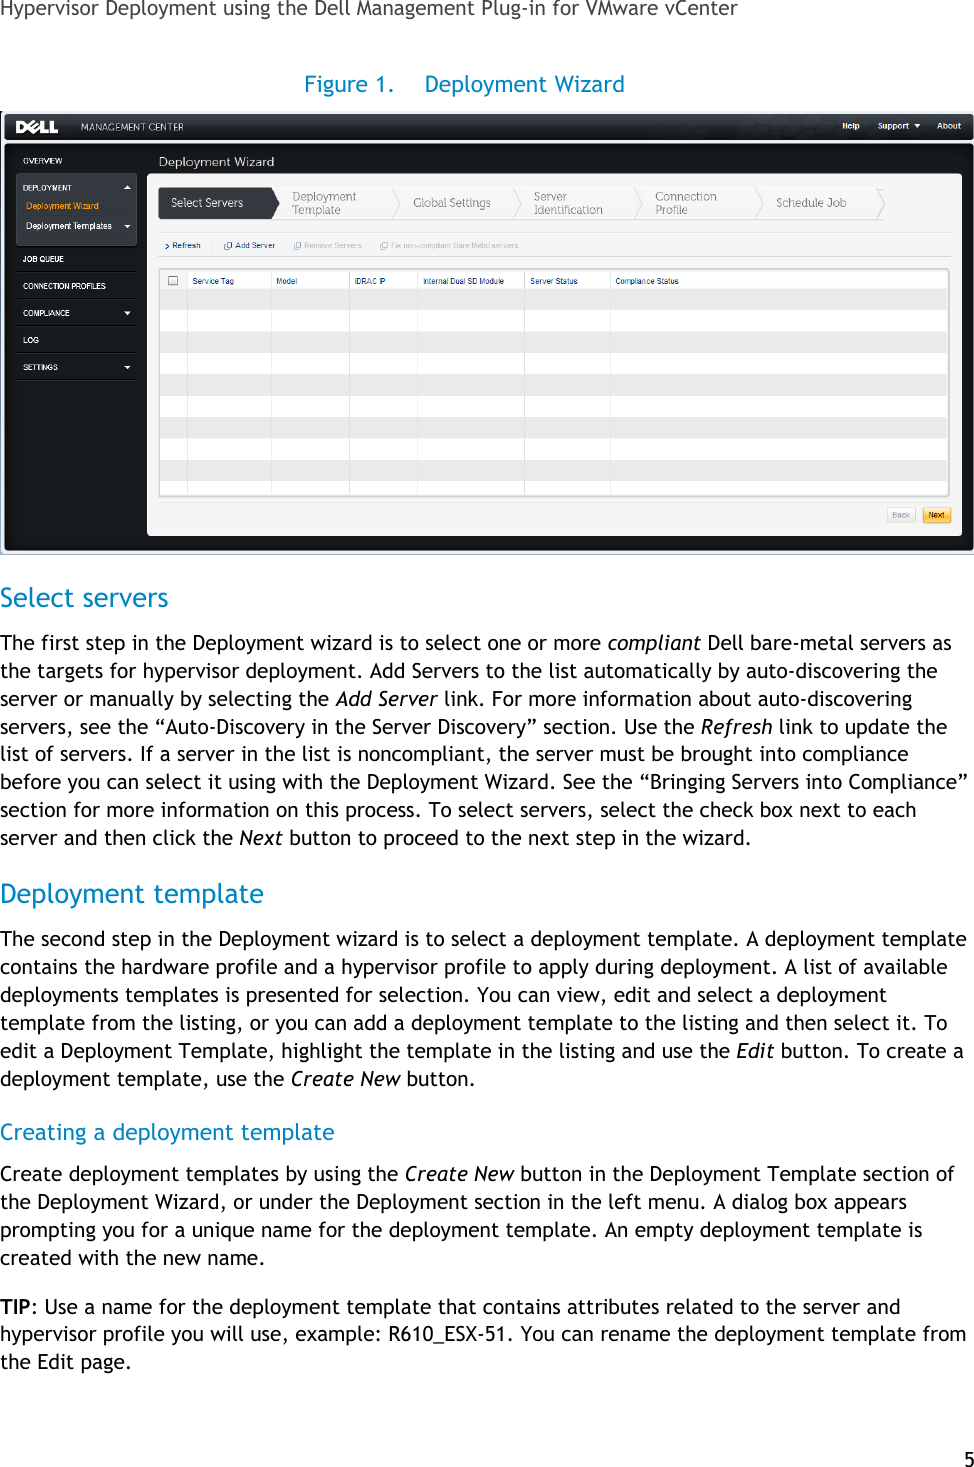 Page 5 of 11 - Dell Dell-Dell-Management-Plug-In-For-Vmware-Vcenter-1-6-Deployment-Guide- Management Plug-in  Dell-dell-management-plug-in-for-vmware-vcenter-1-6-deployment-guide